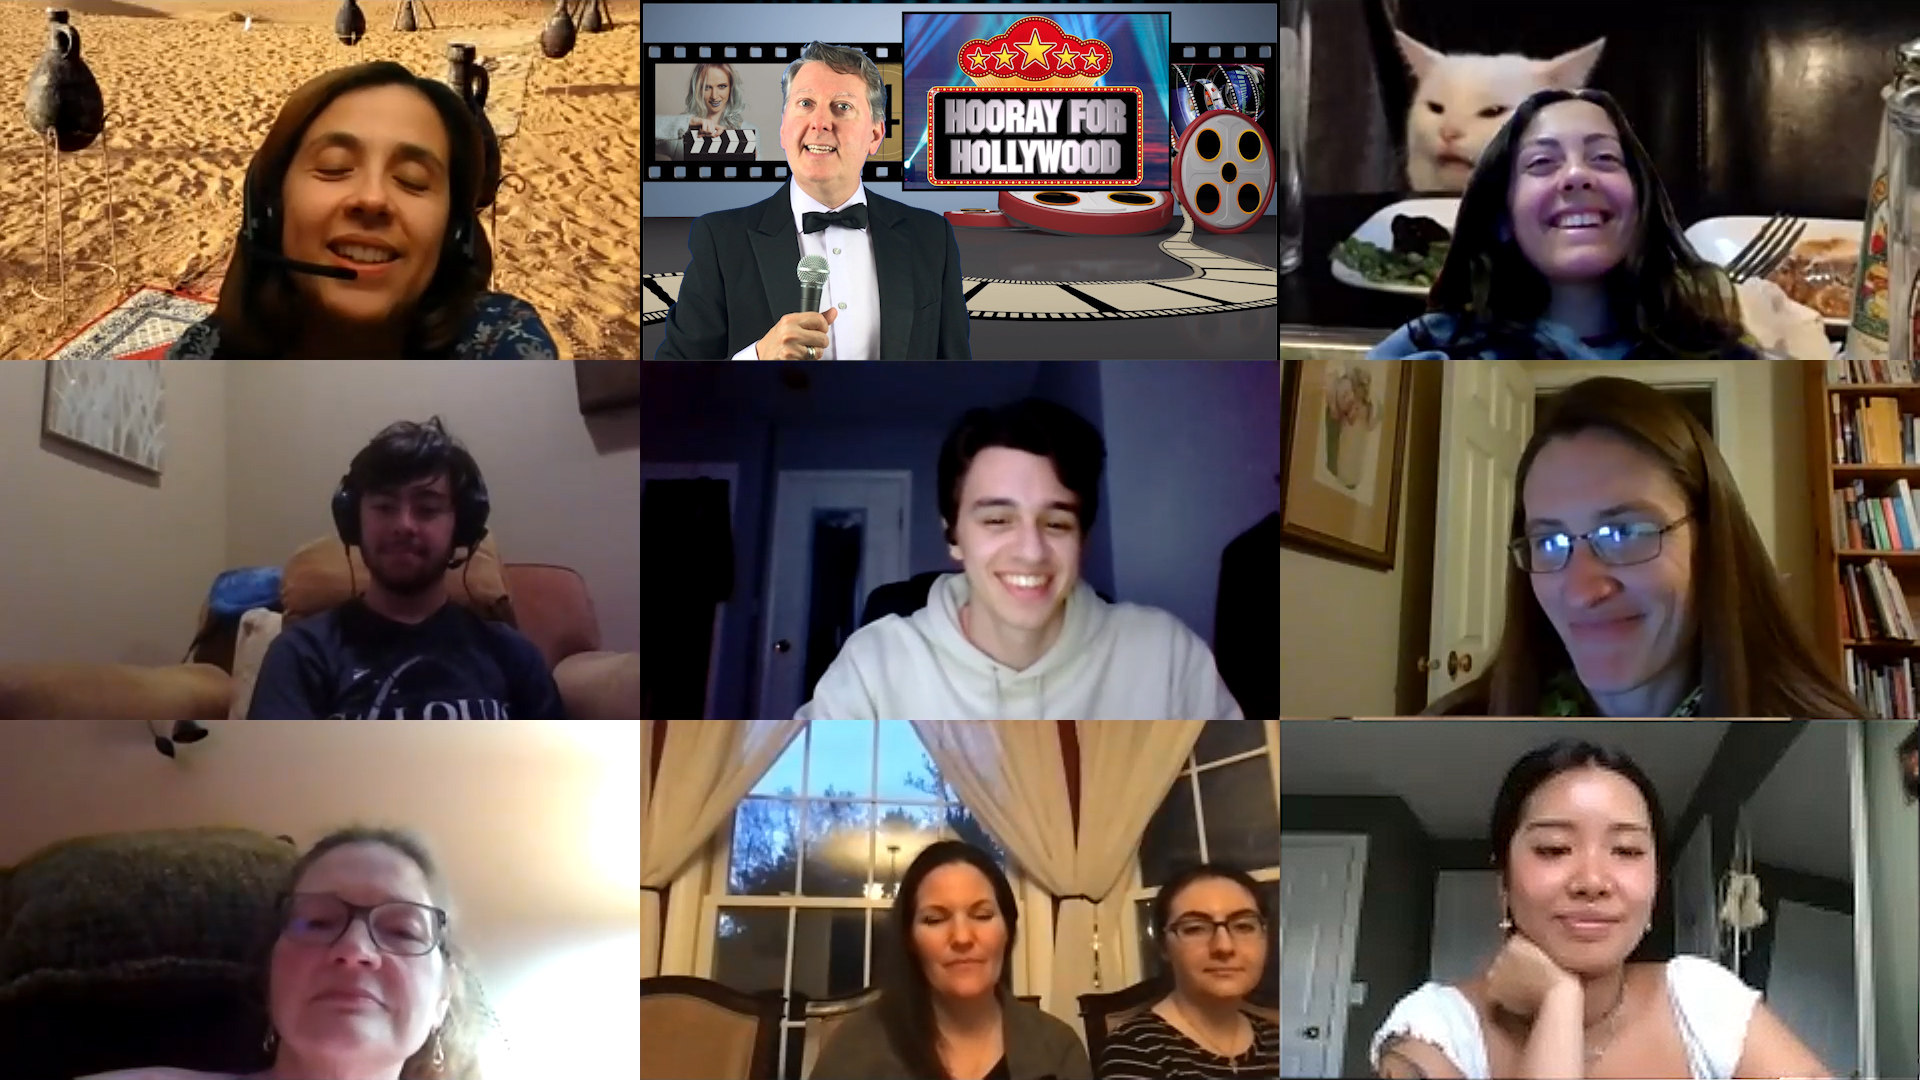 A collage of people in a video chat.